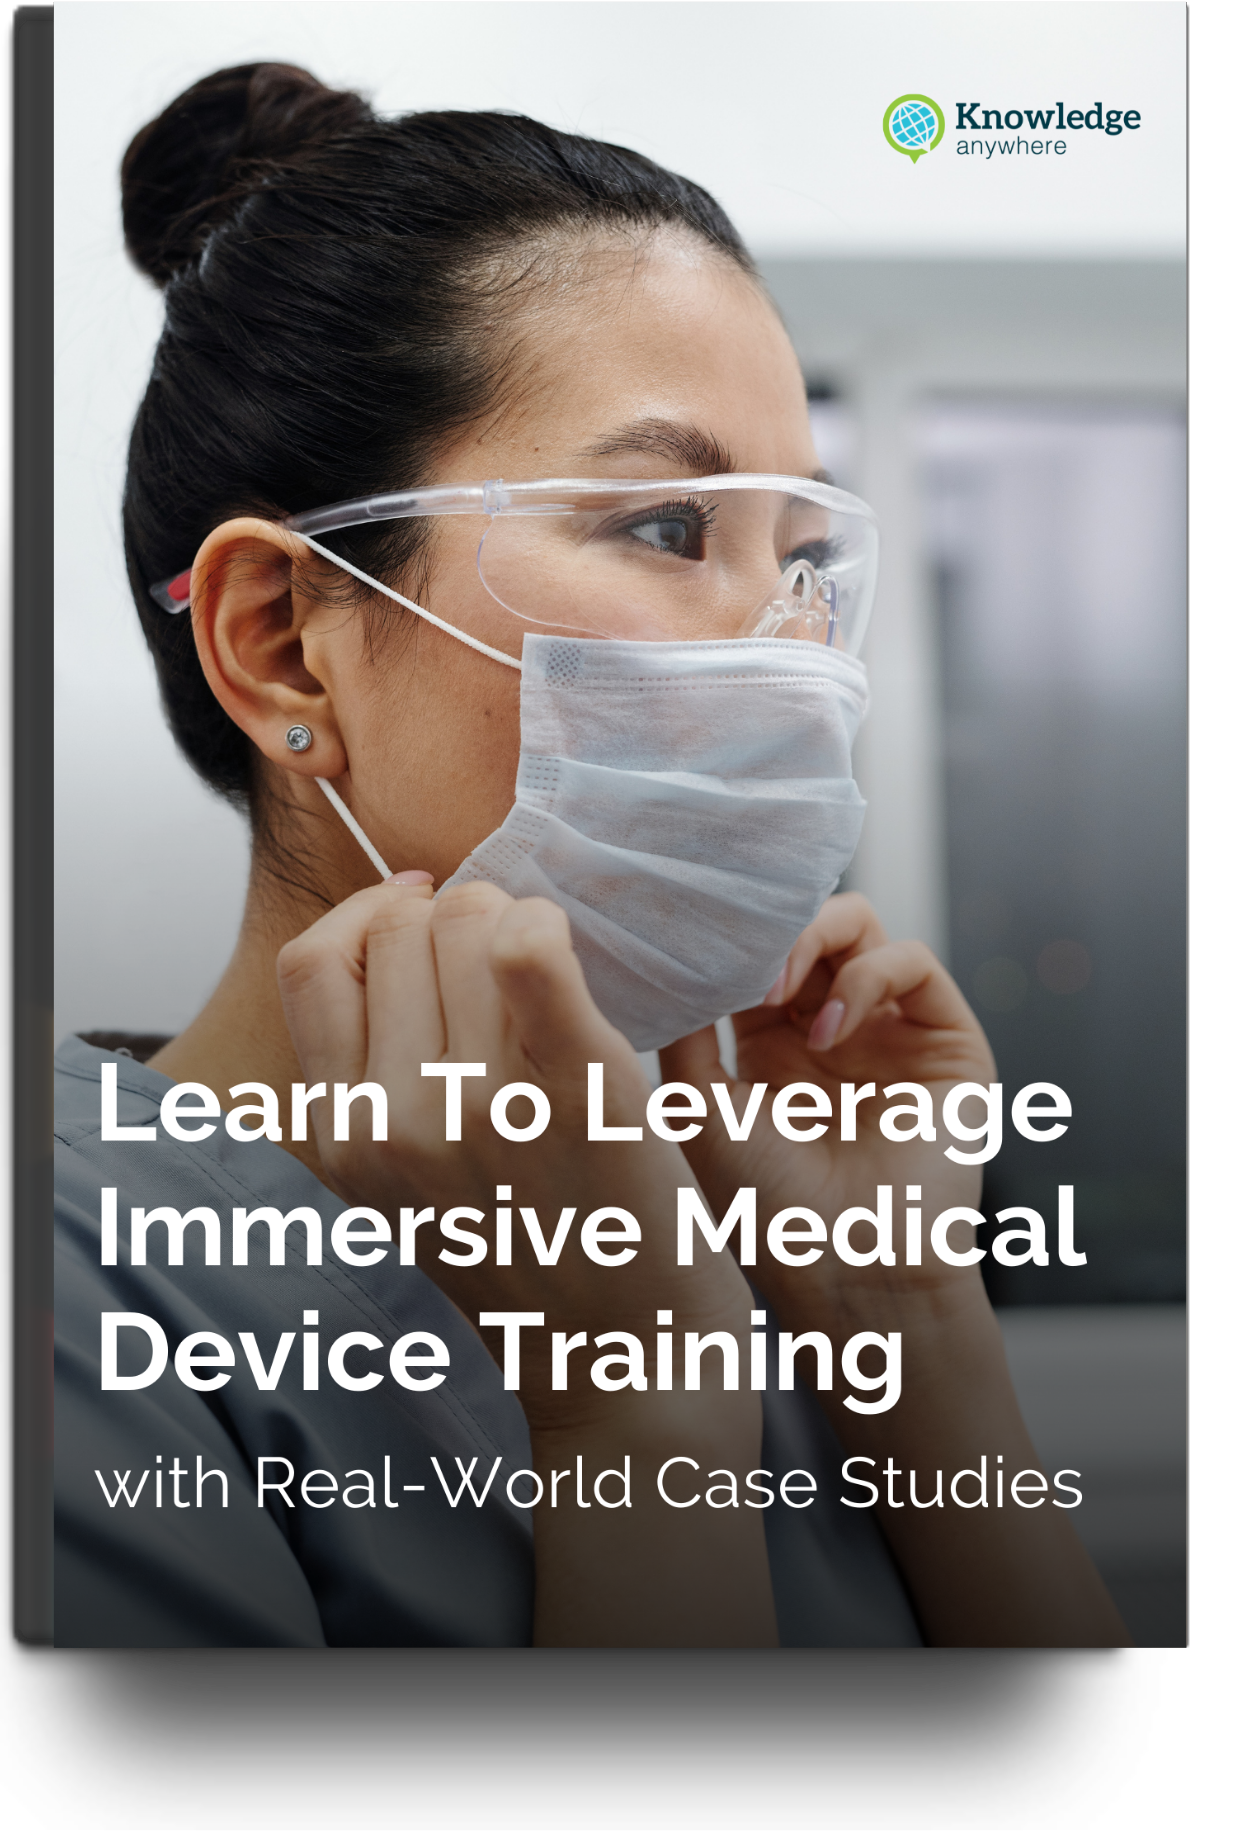 Learn To Leverage Immersive Medical Device Training